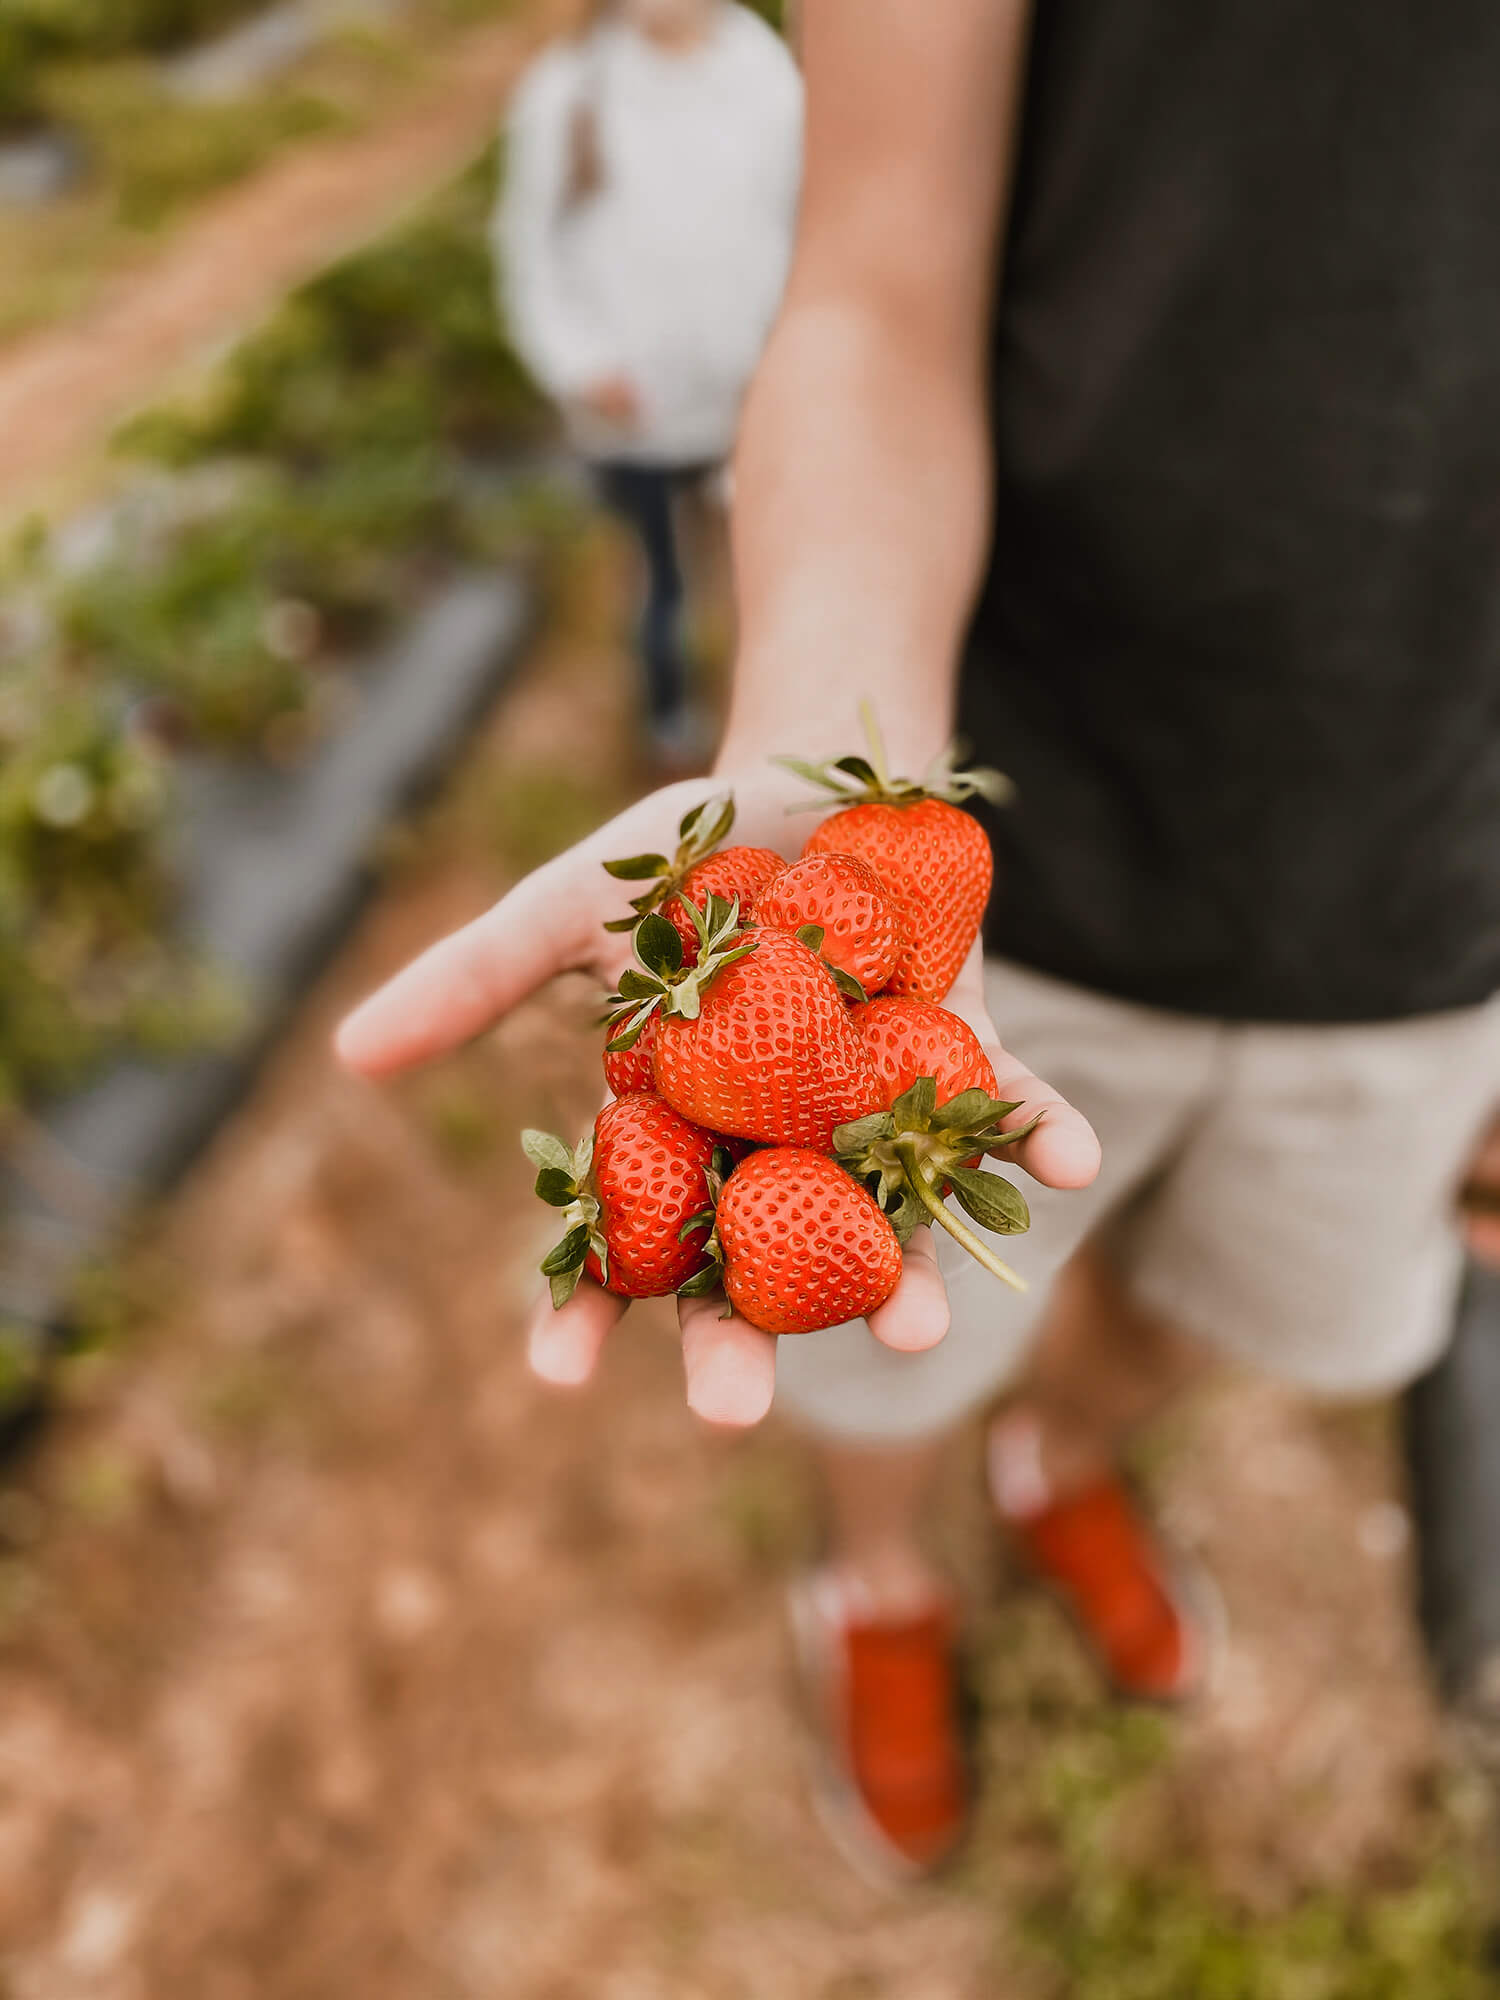 Strawberry picking in Nashville Tennessee and another edition of Casual Friday over on KaraLayne.com!